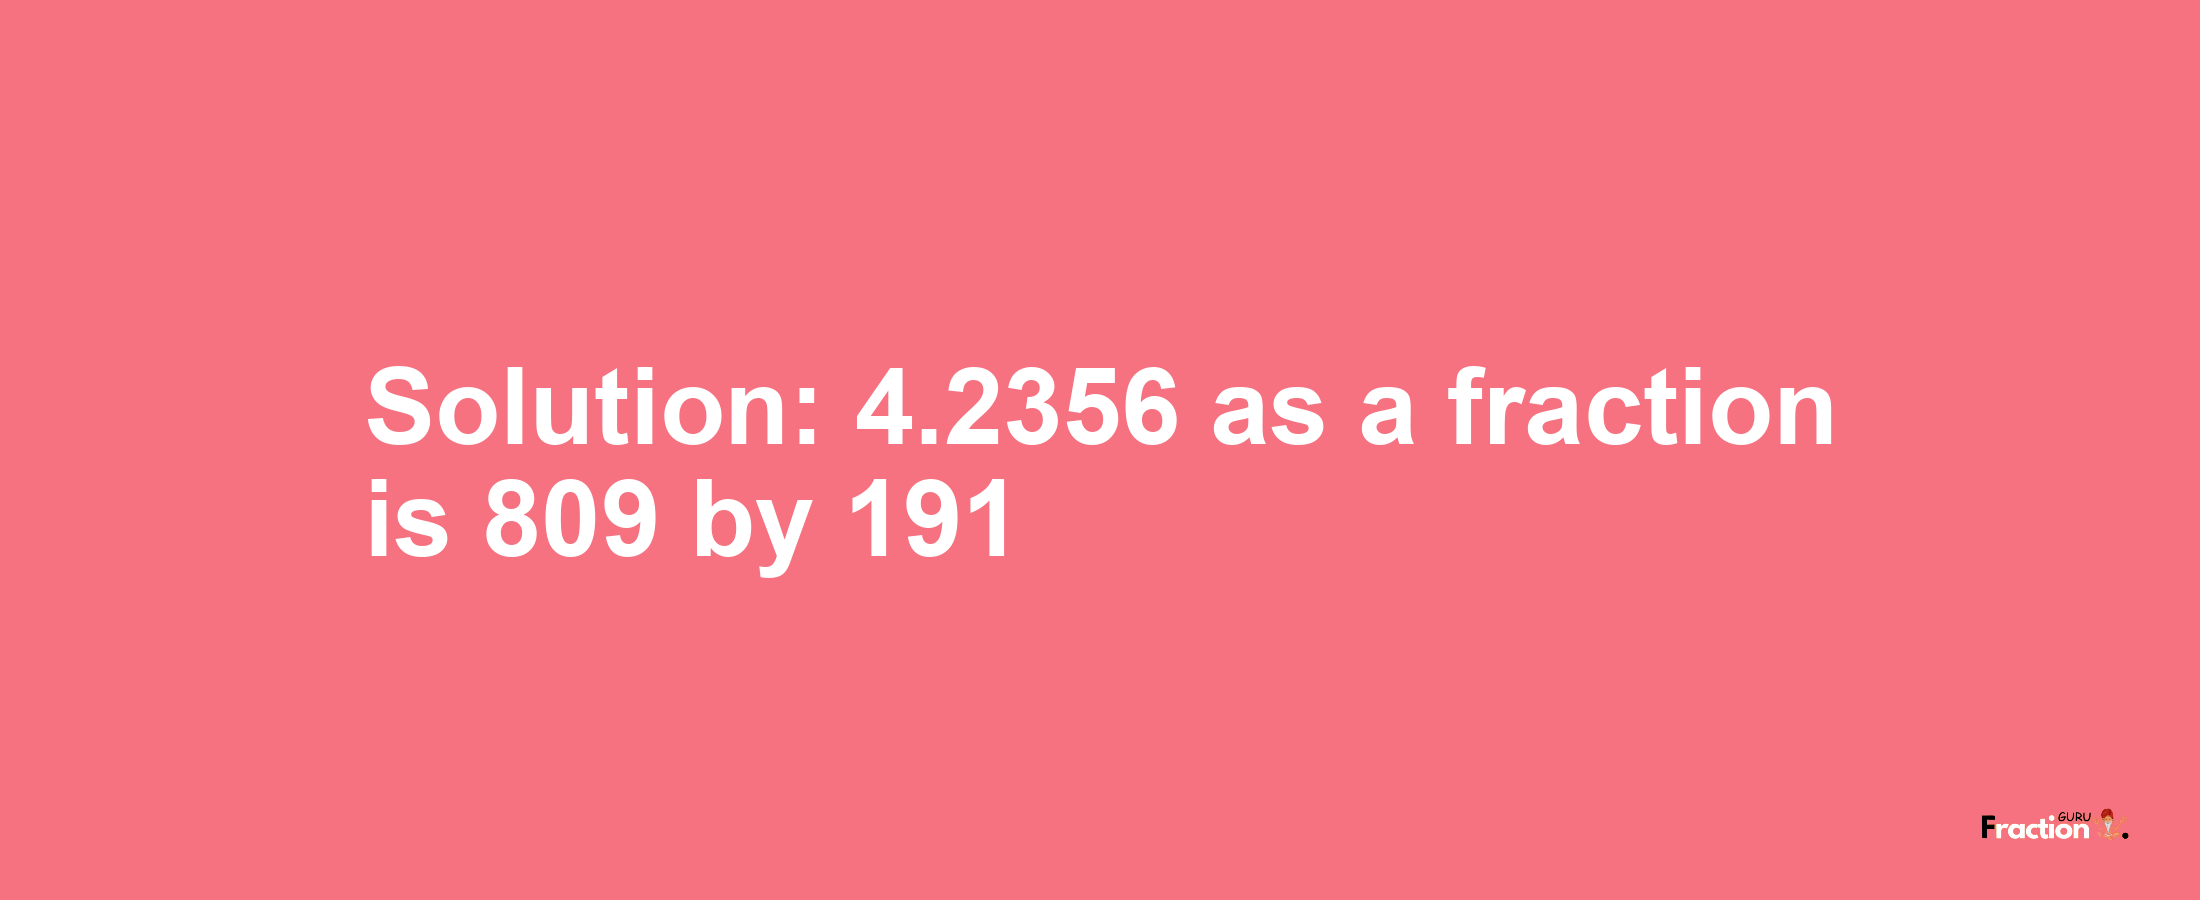 Solution:4.2356 as a fraction is 809/191